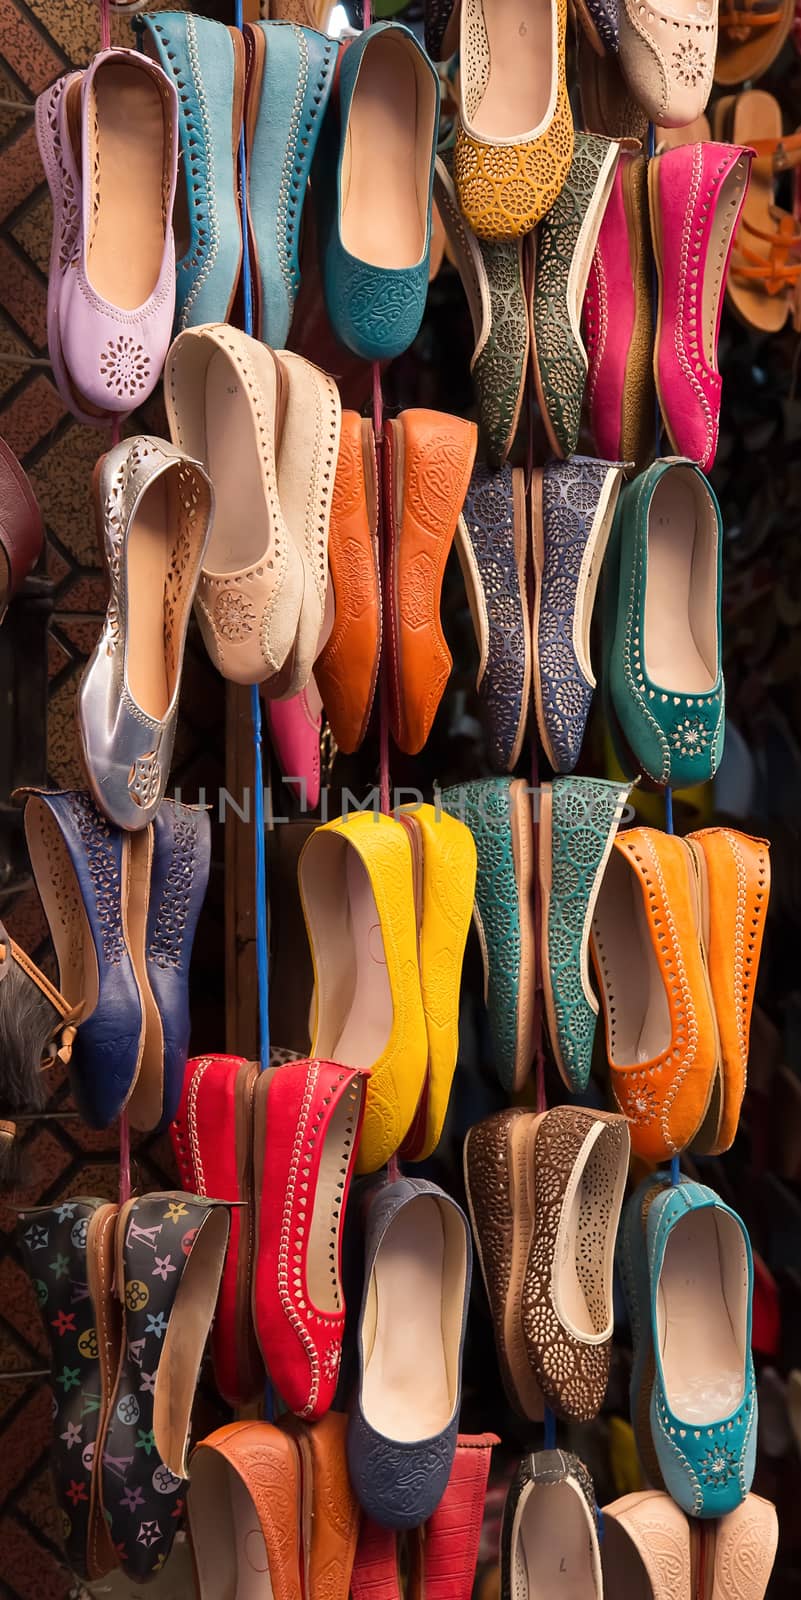 Moroccan colourful leather shoes on display by Brigida_Soriano